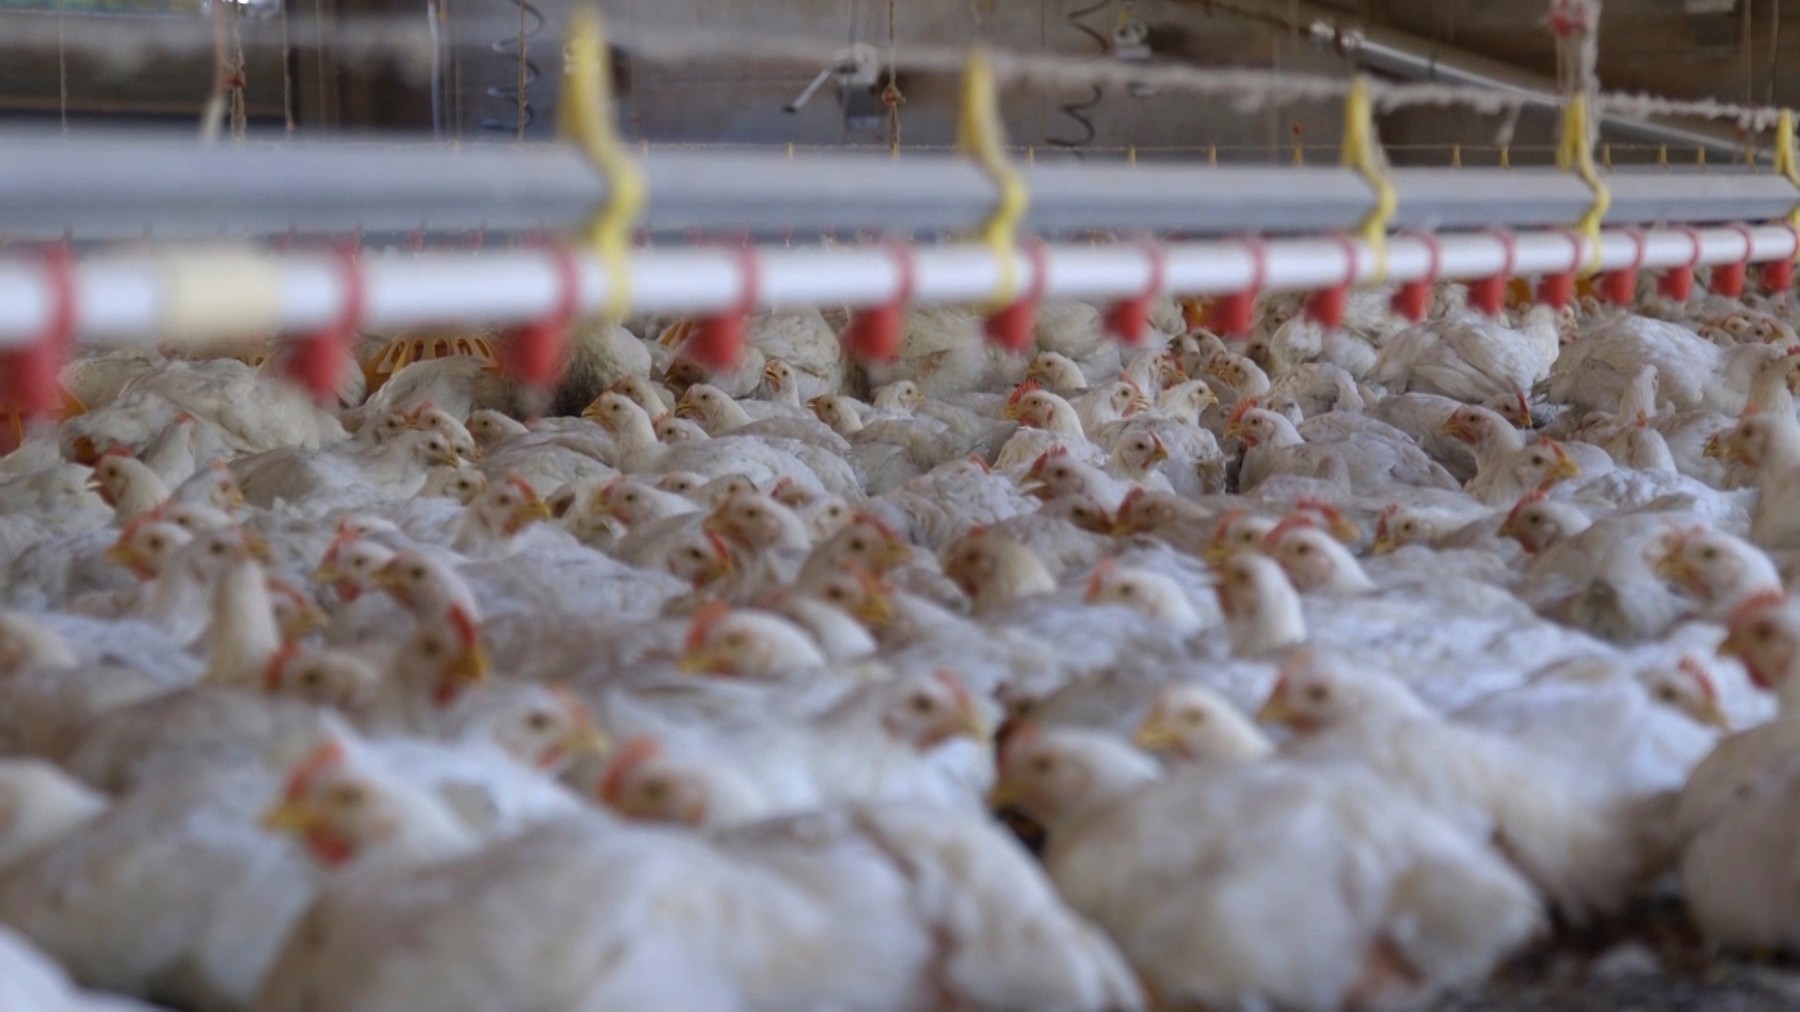 Chickens crammed together on a factory farm.